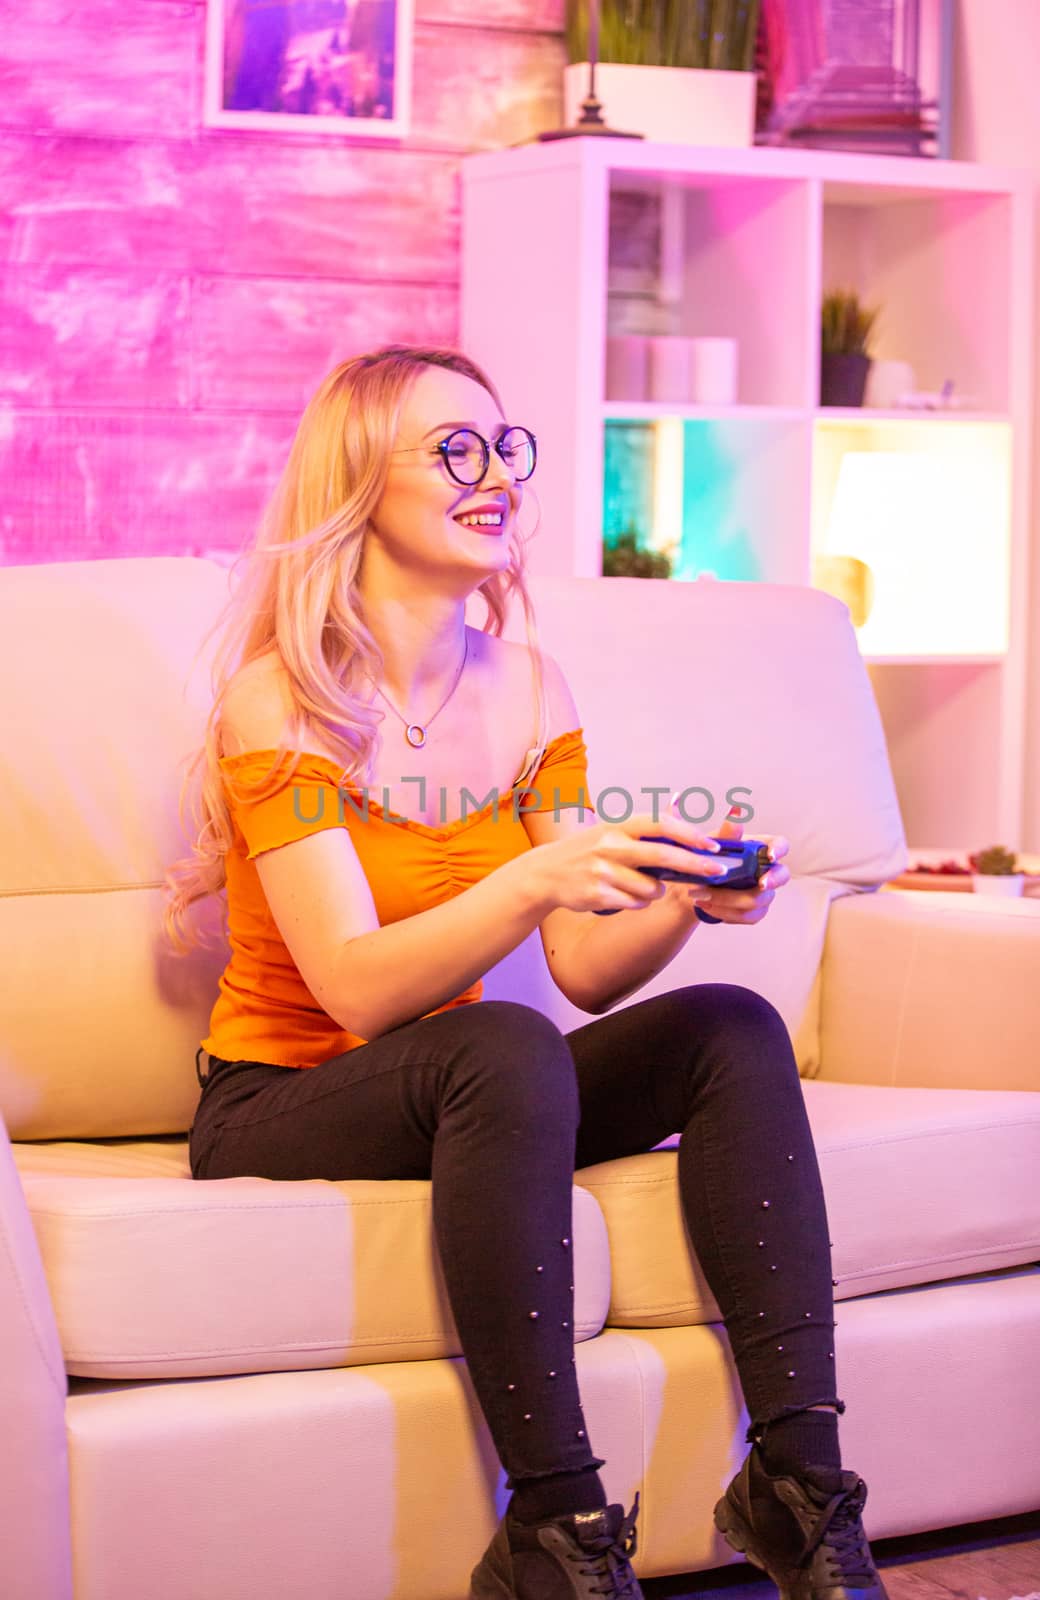 Beautiful blonde girl excited while playing video games by DCStudio